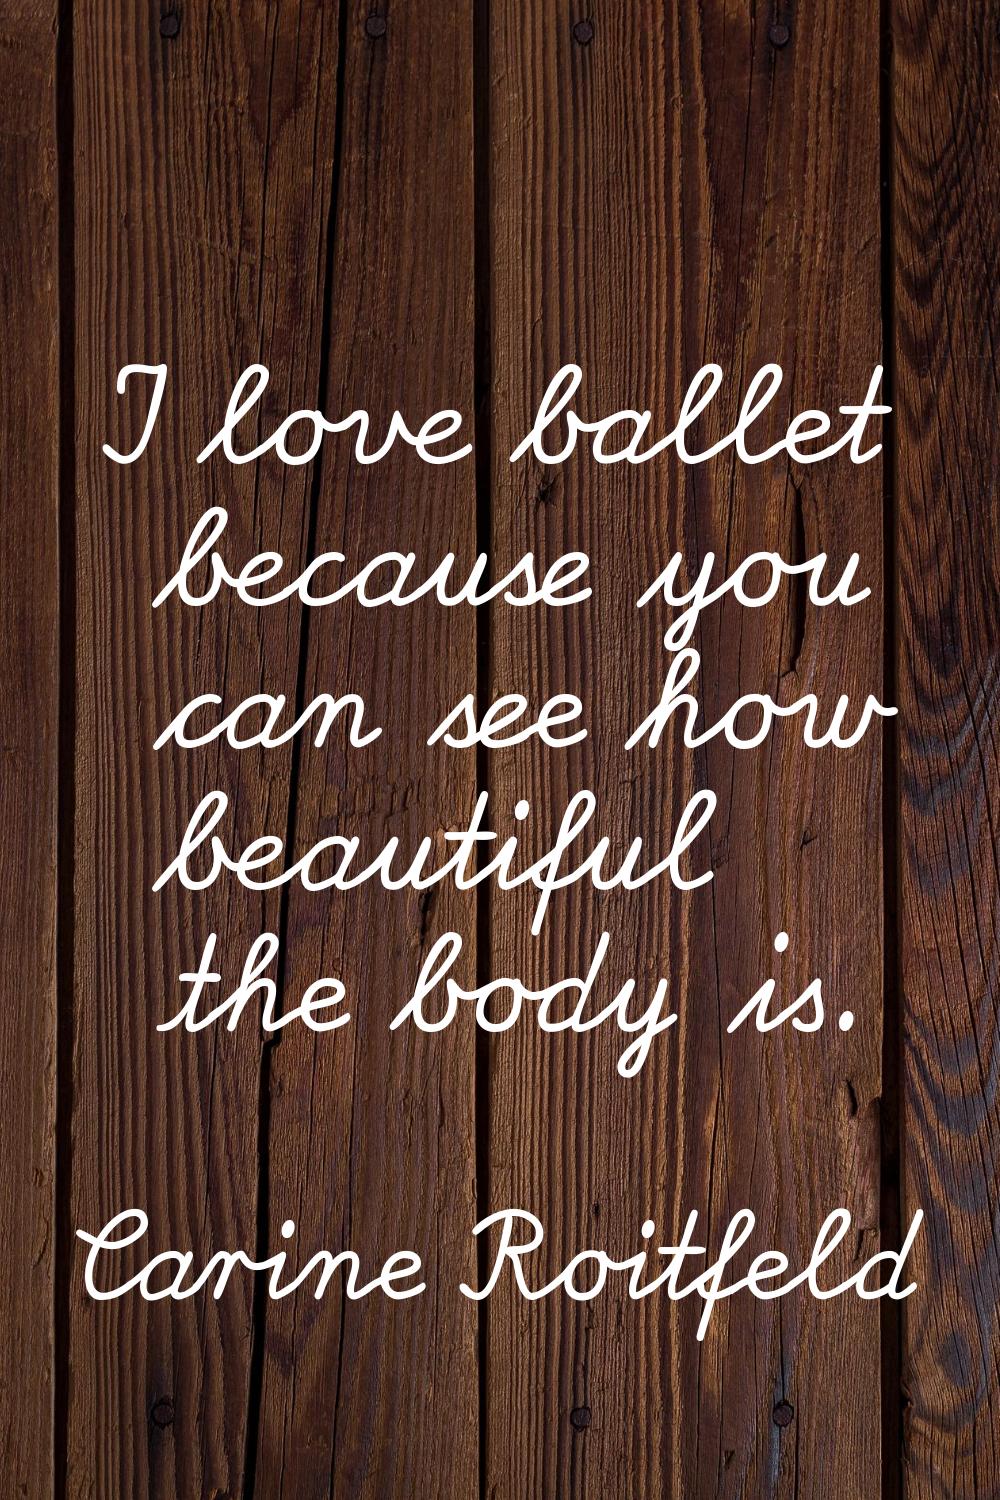 I love ballet because you can see how beautiful the body is.